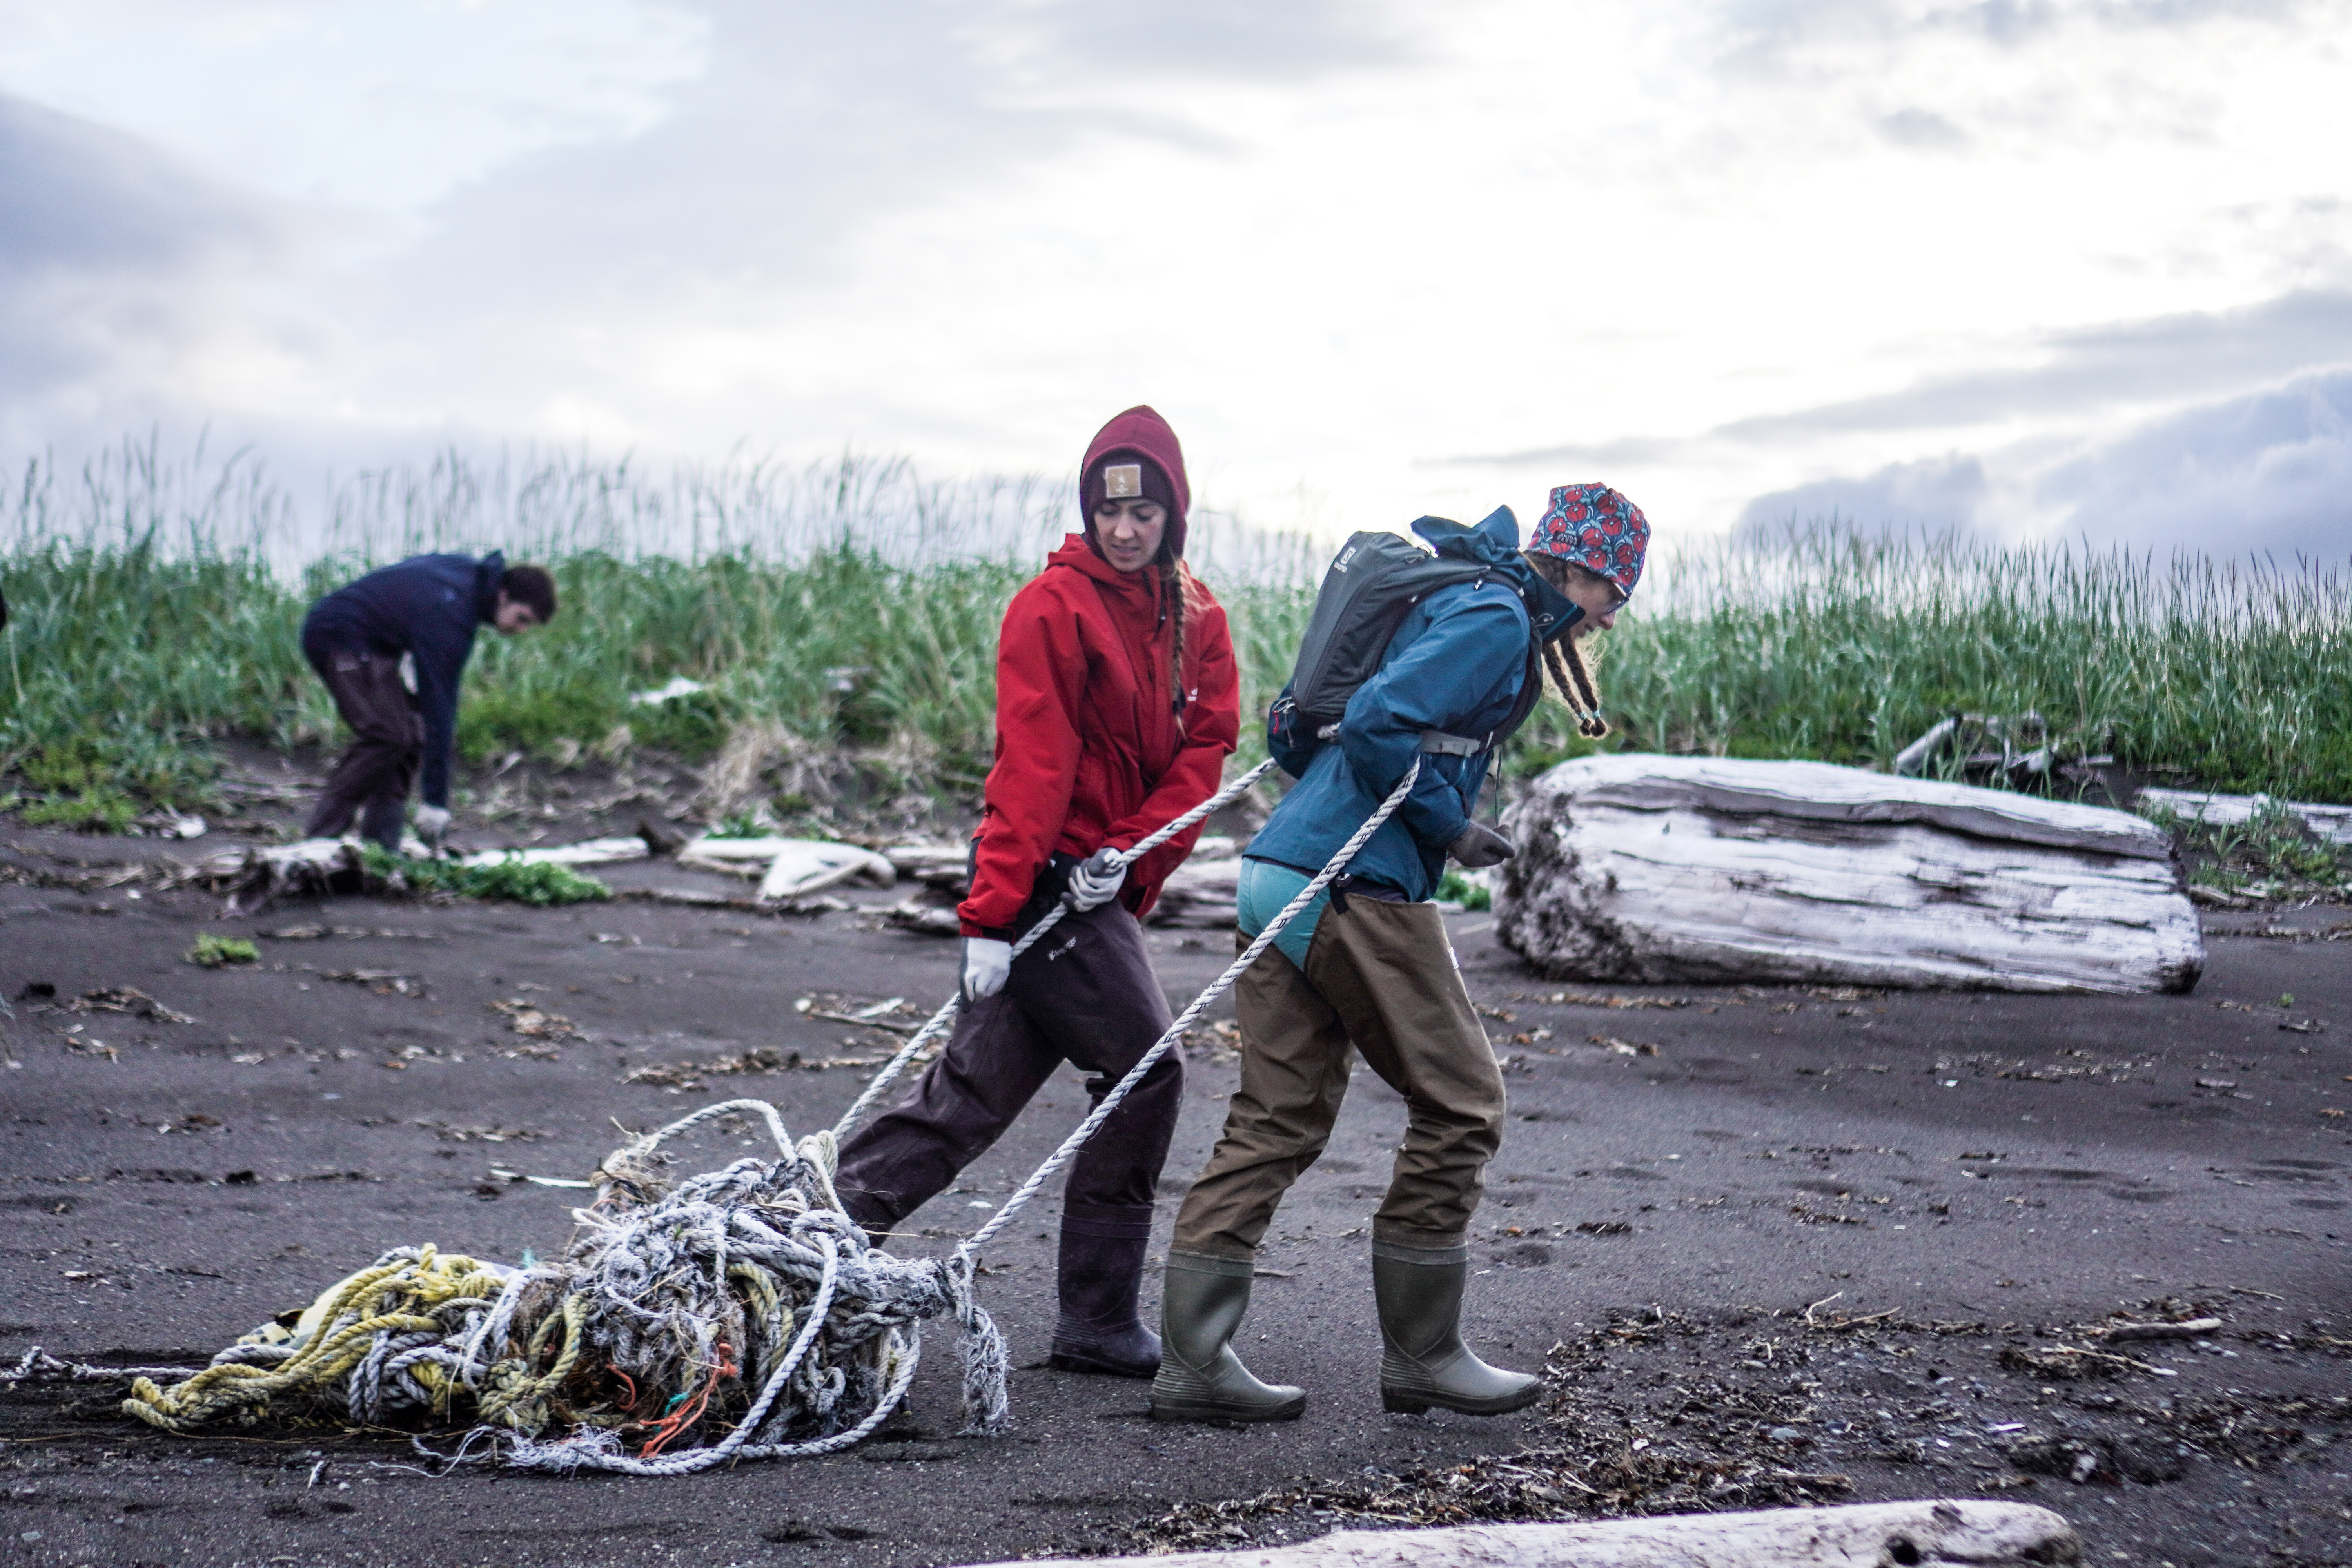 Two people walk across a beach, pulling a tangle of ropes. Another person in the background is picking up plastic trash near some drift wood